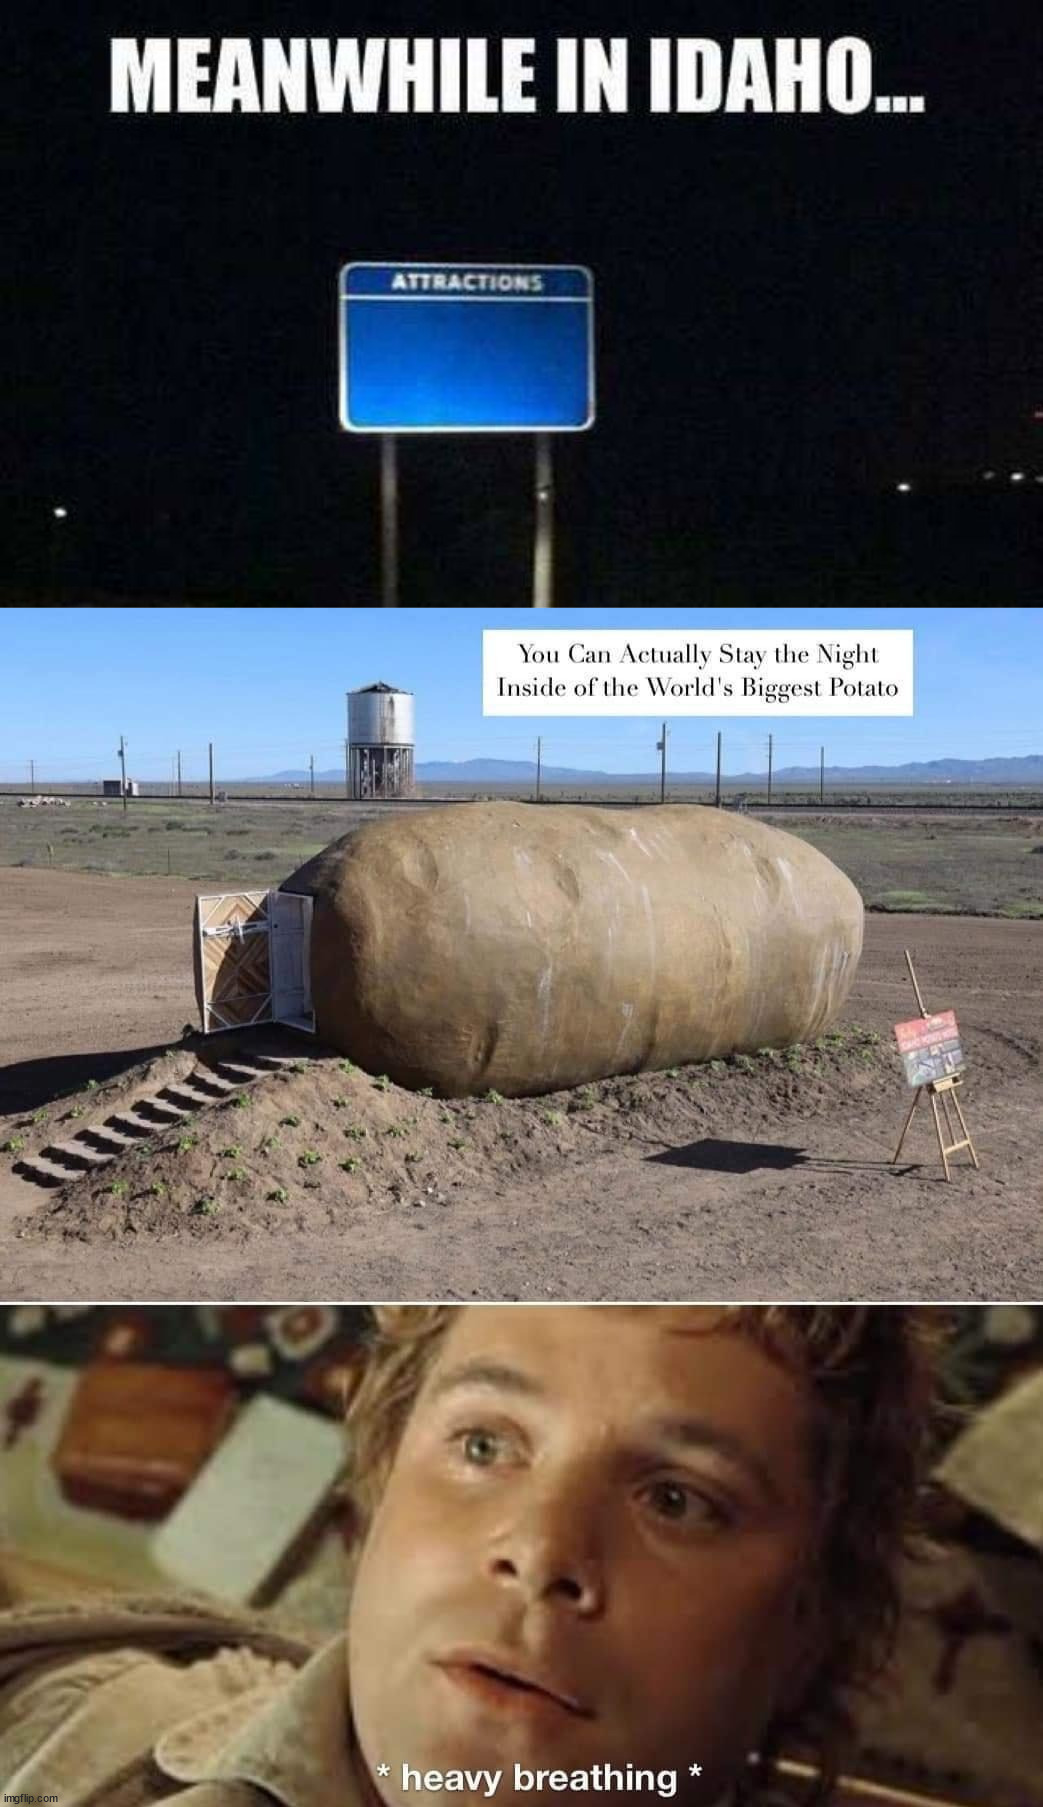 It is real | image tagged in idaho,potato,lotr,hobbits,real life,cabin fever | made w/ Imgflip meme maker